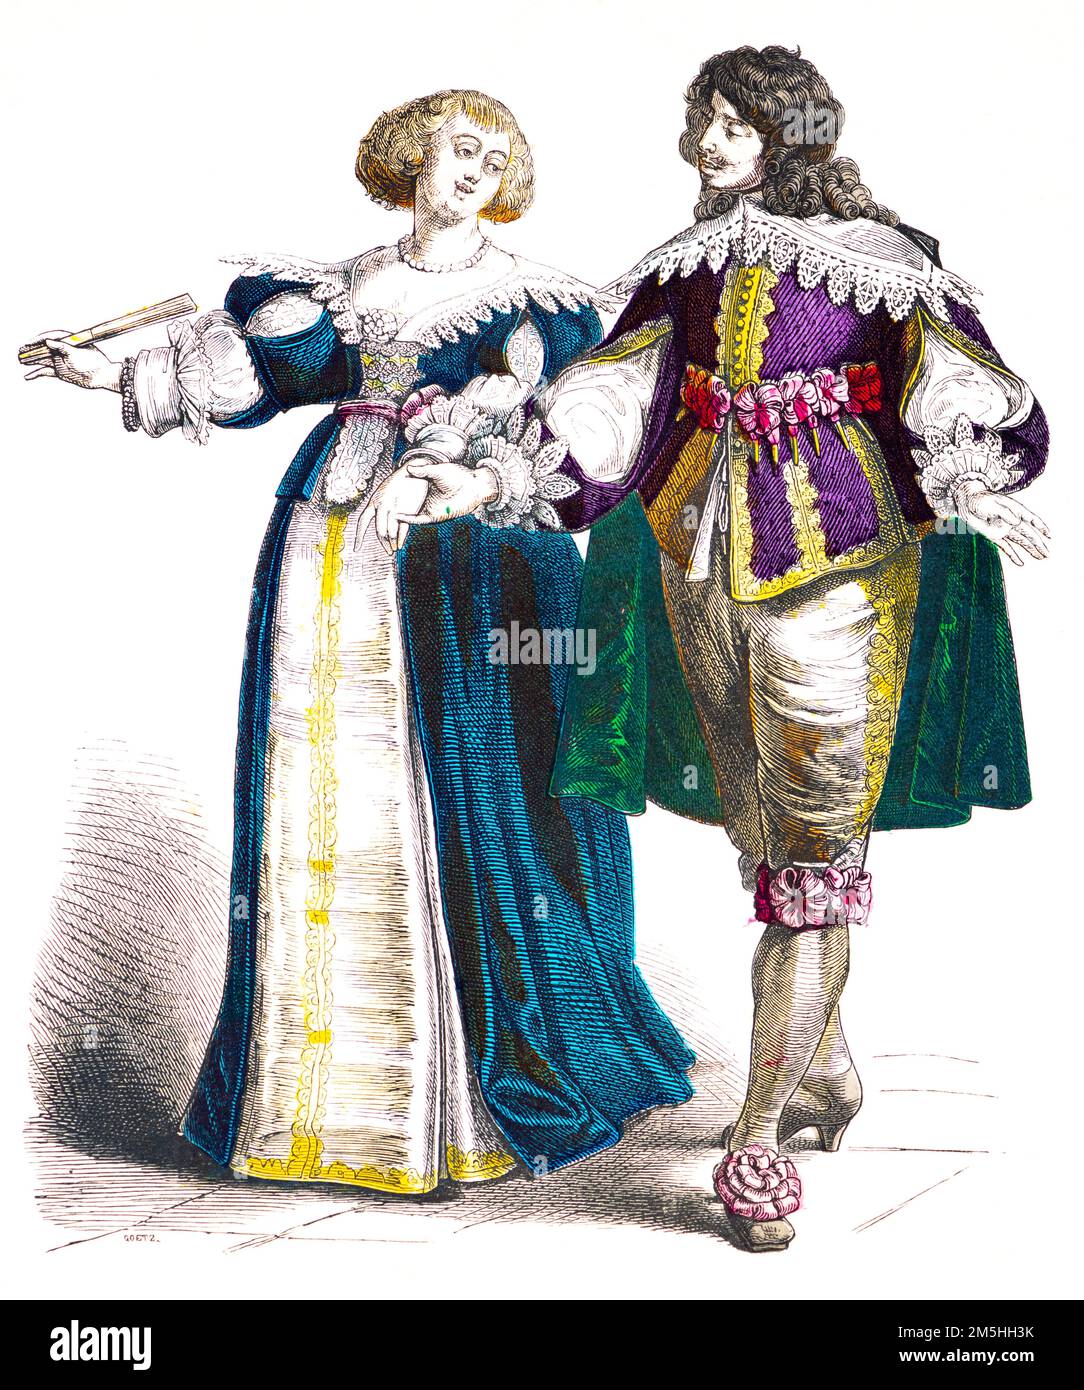 Historical costumes in the middle of 17th century,  historical illustration, Münchener Bilderbogen, München 1890 Stock Photo